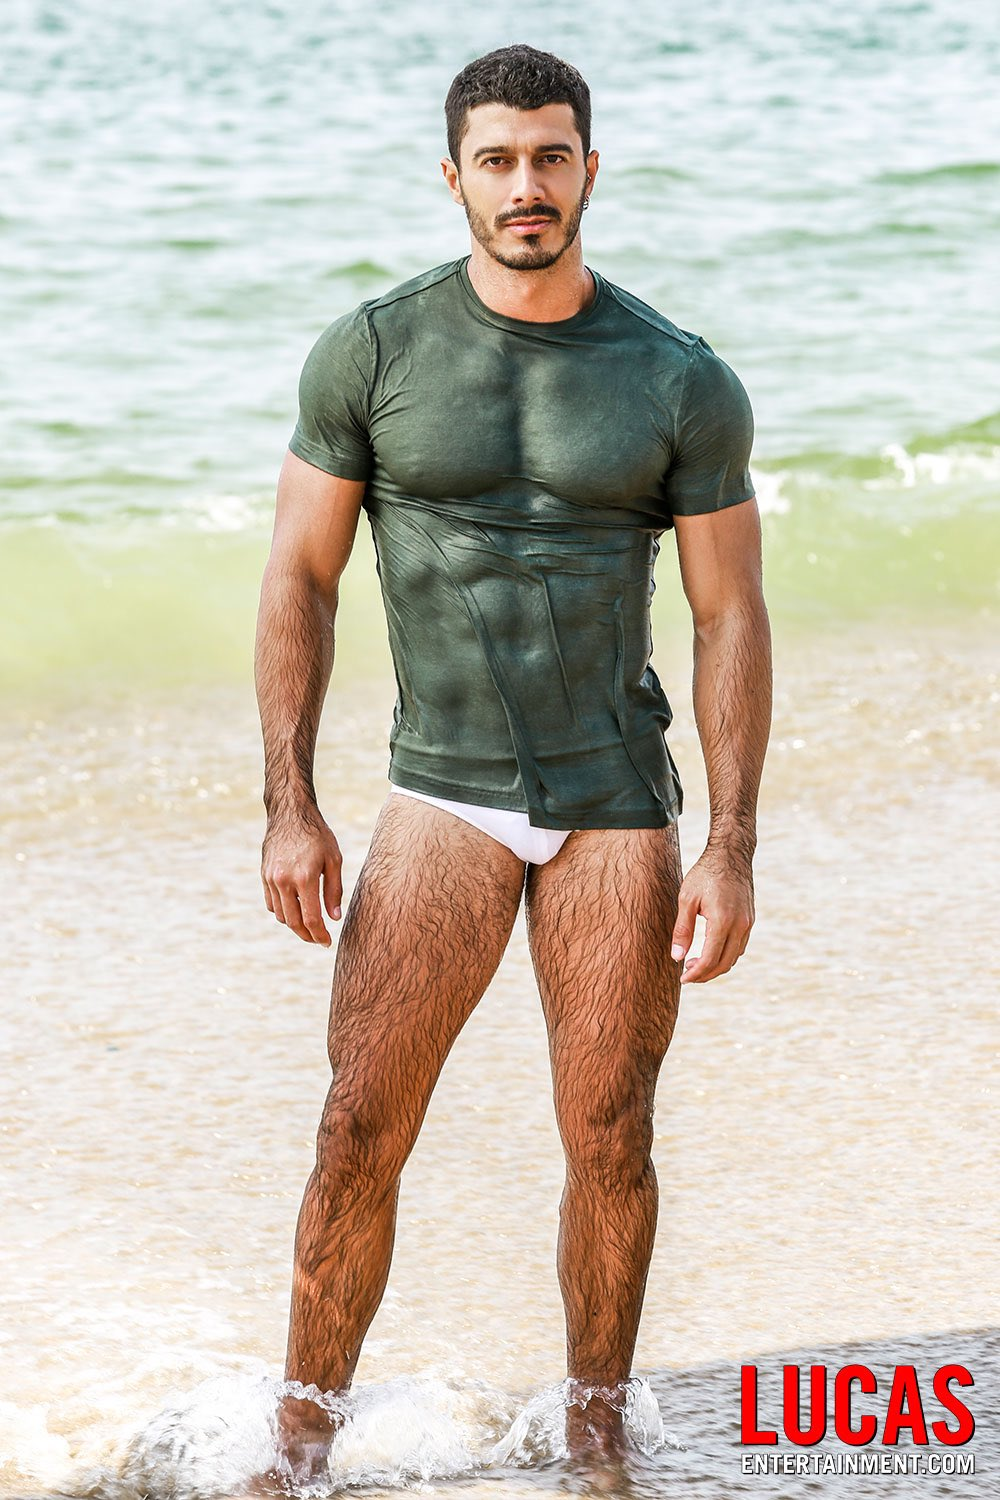 Lobo Carreira emerging from the ocean wearing a wet tight green t-shirt and white speedo for lucasentertainment.com promo shot